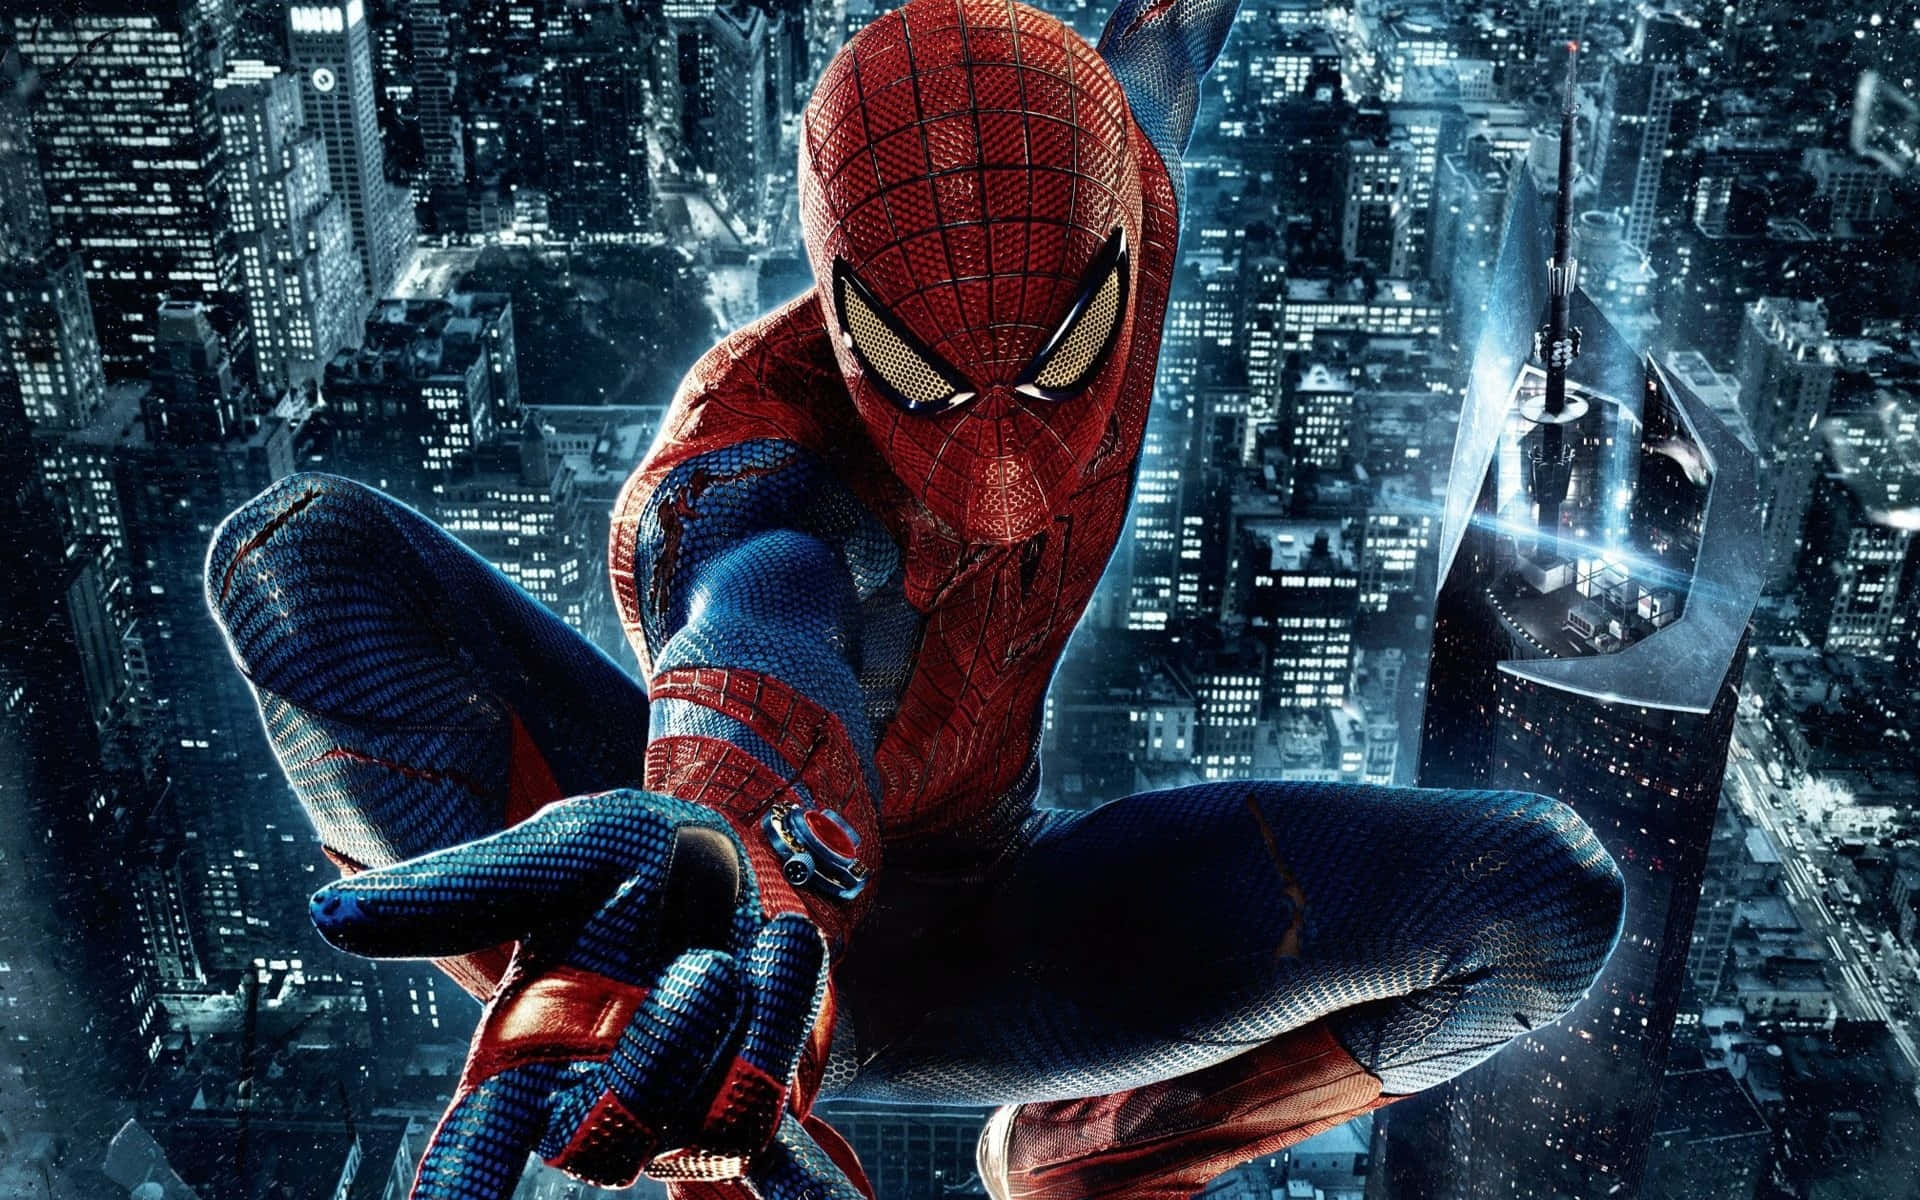 The Ultimate Spider-Man Swinging Through New York City Wallpaper